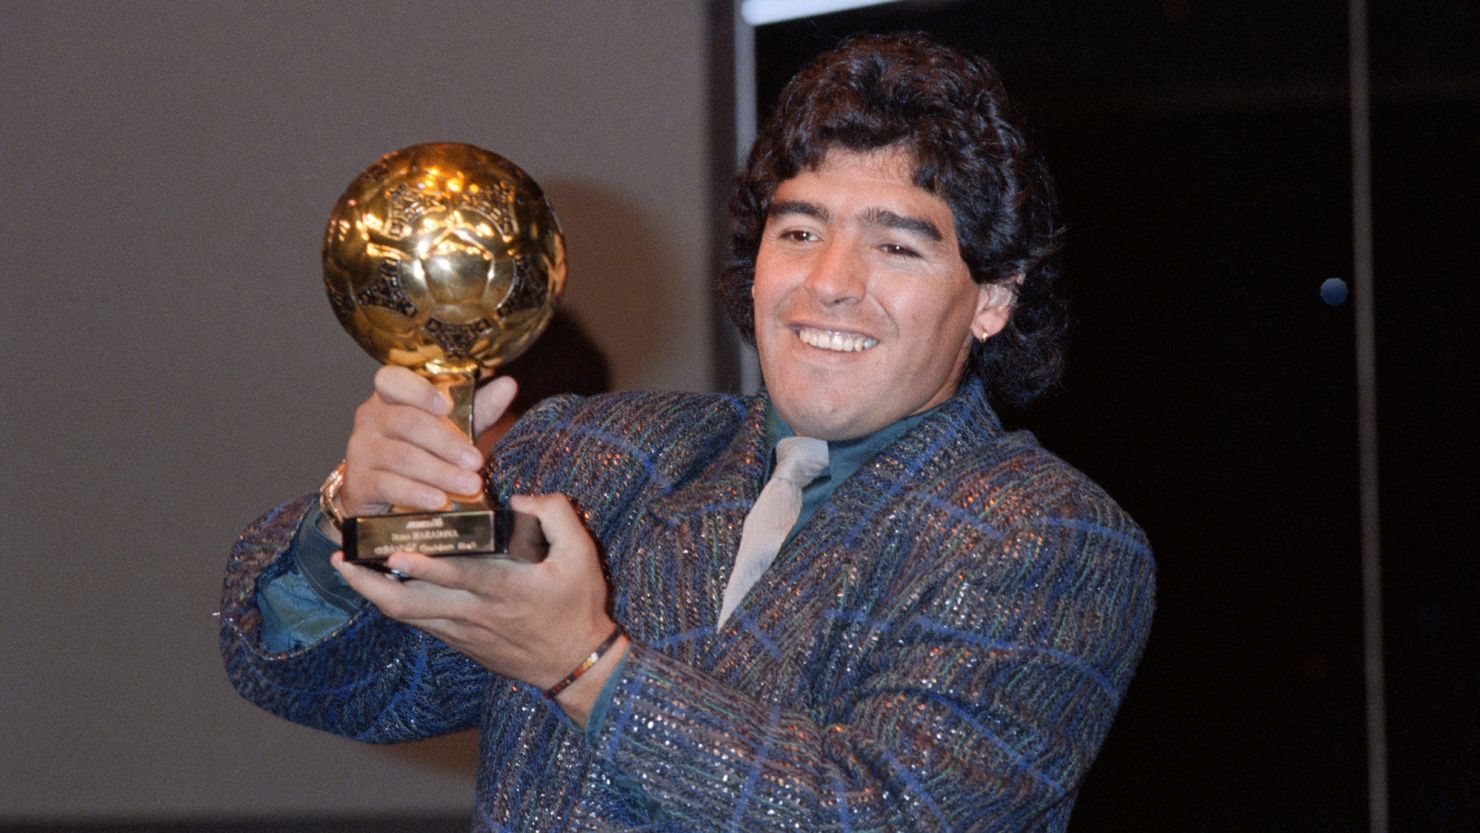 Maradona received with the Golden Ball award in Paris after the 1986 World Cup.